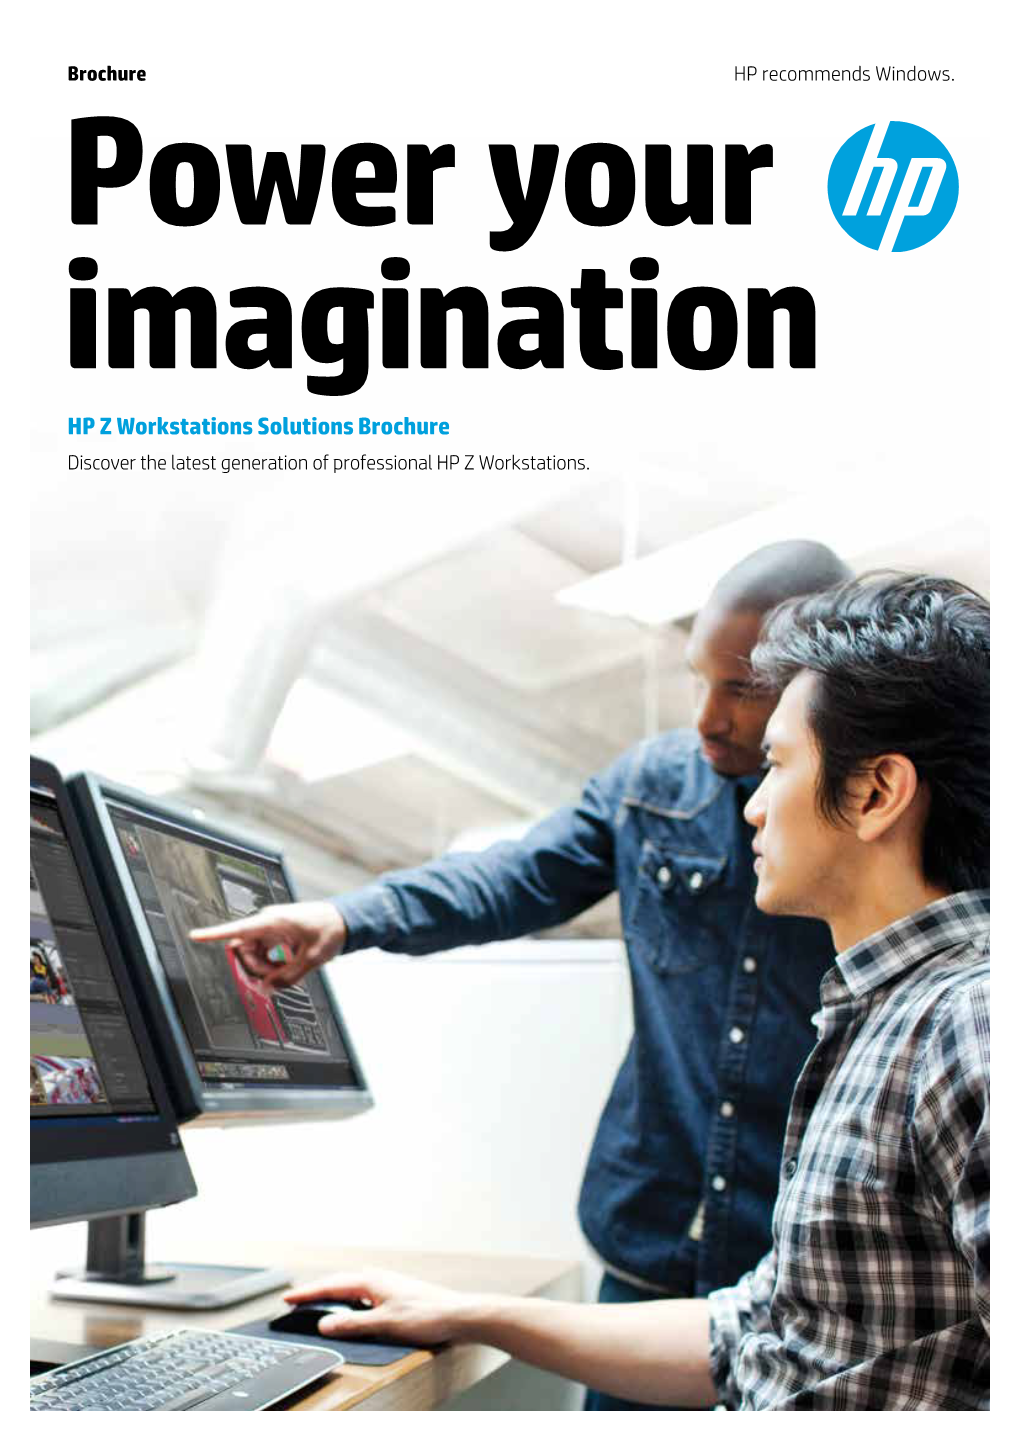 HP Z Workstations Solutions Brochure Discover the Latest Generation of Professional HP Z Workstations